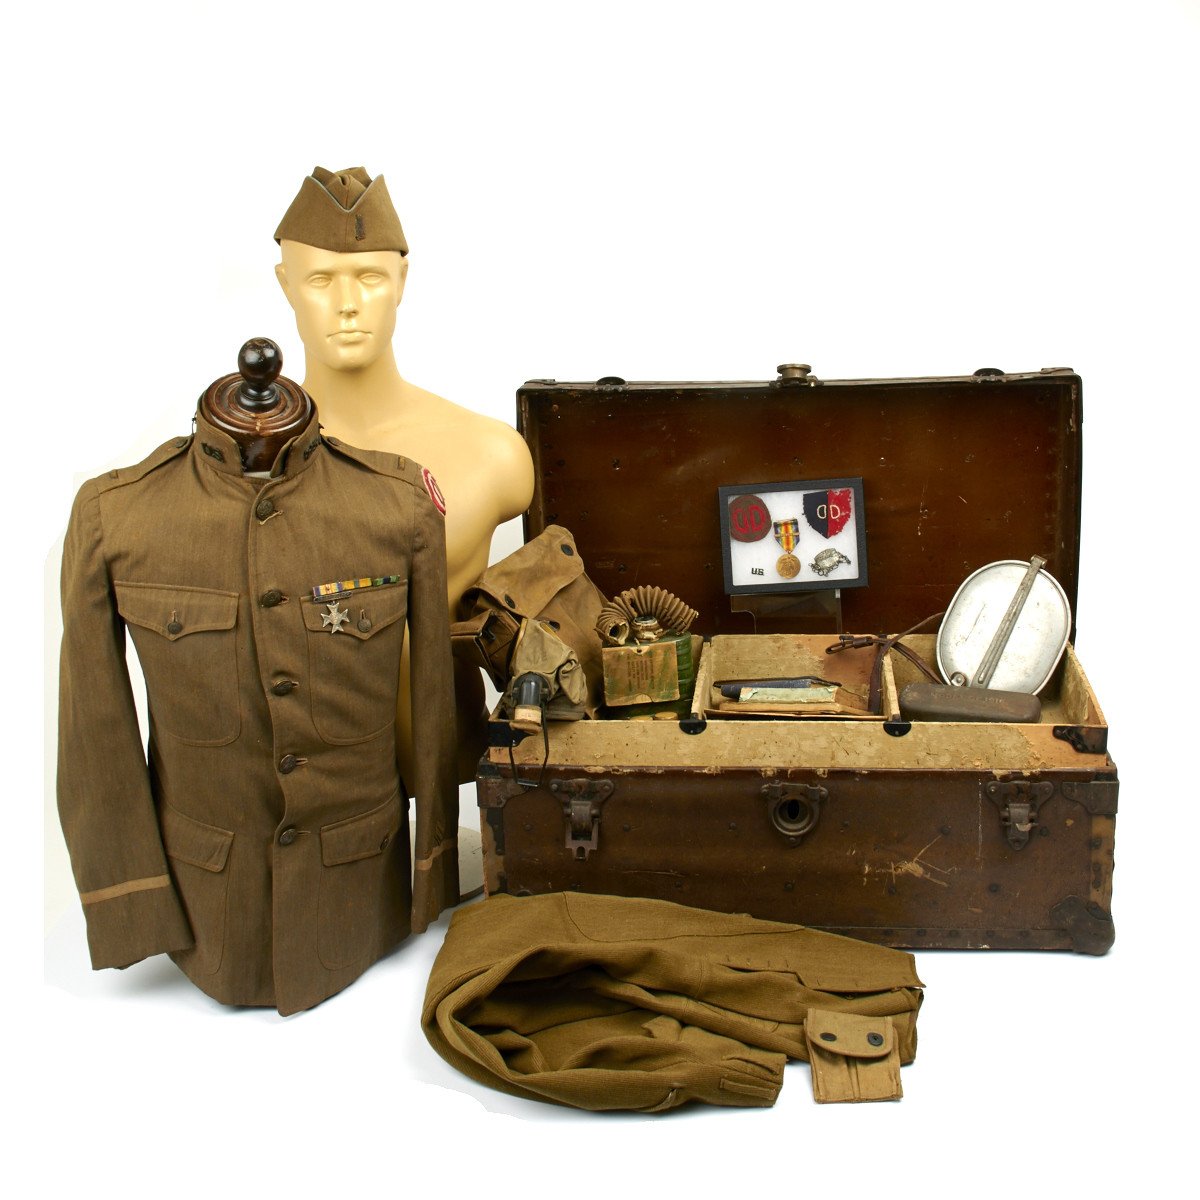 US Army footlocker used by a soldier - Collections Search - United States  Holocaust Memorial Museum